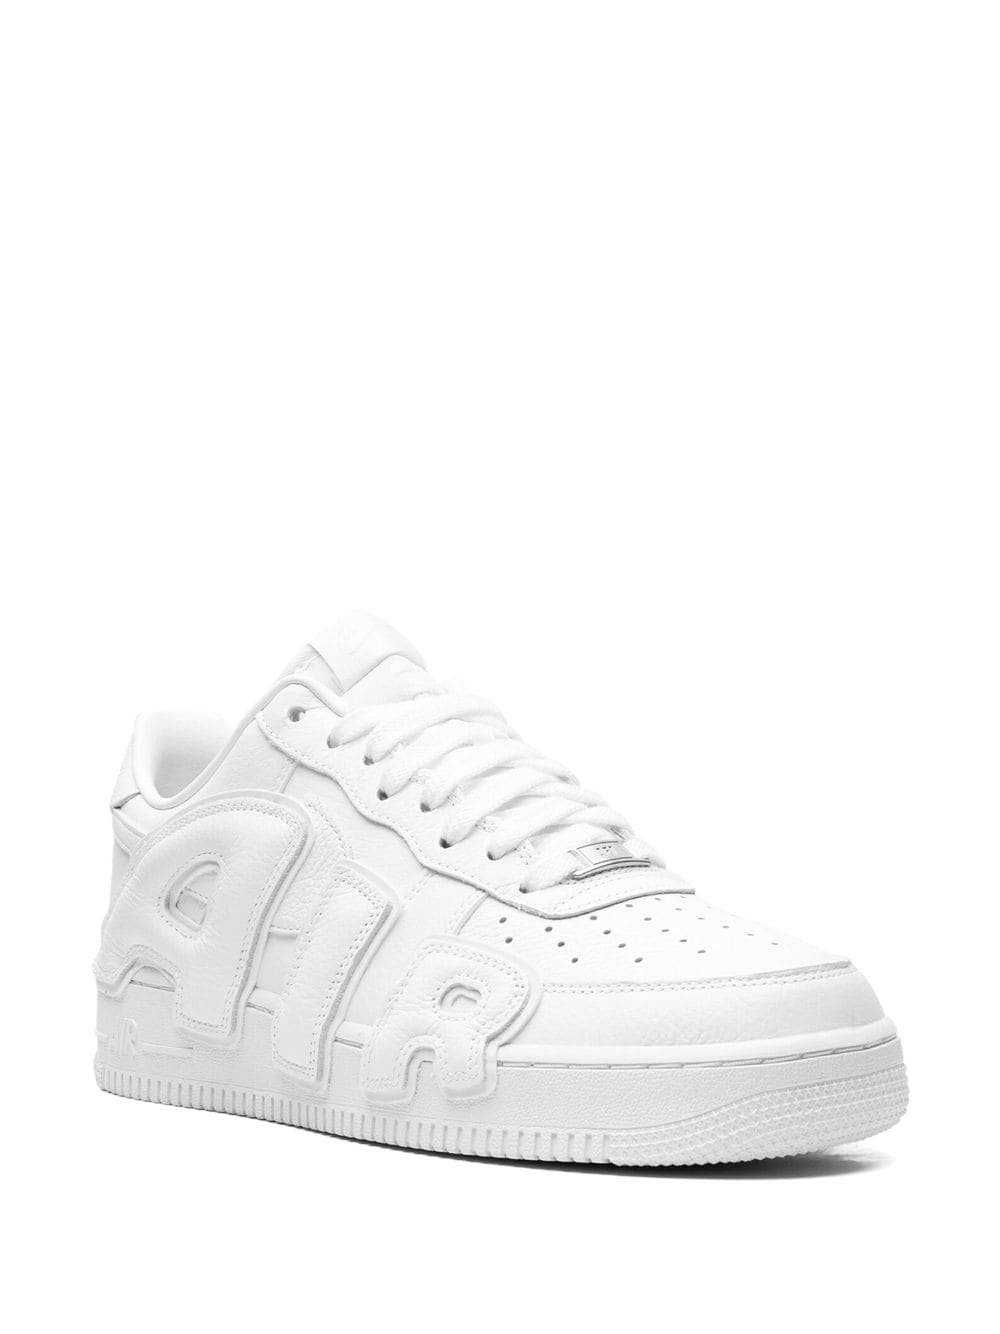 x CPFM Air Force 1 Triple White sneakers